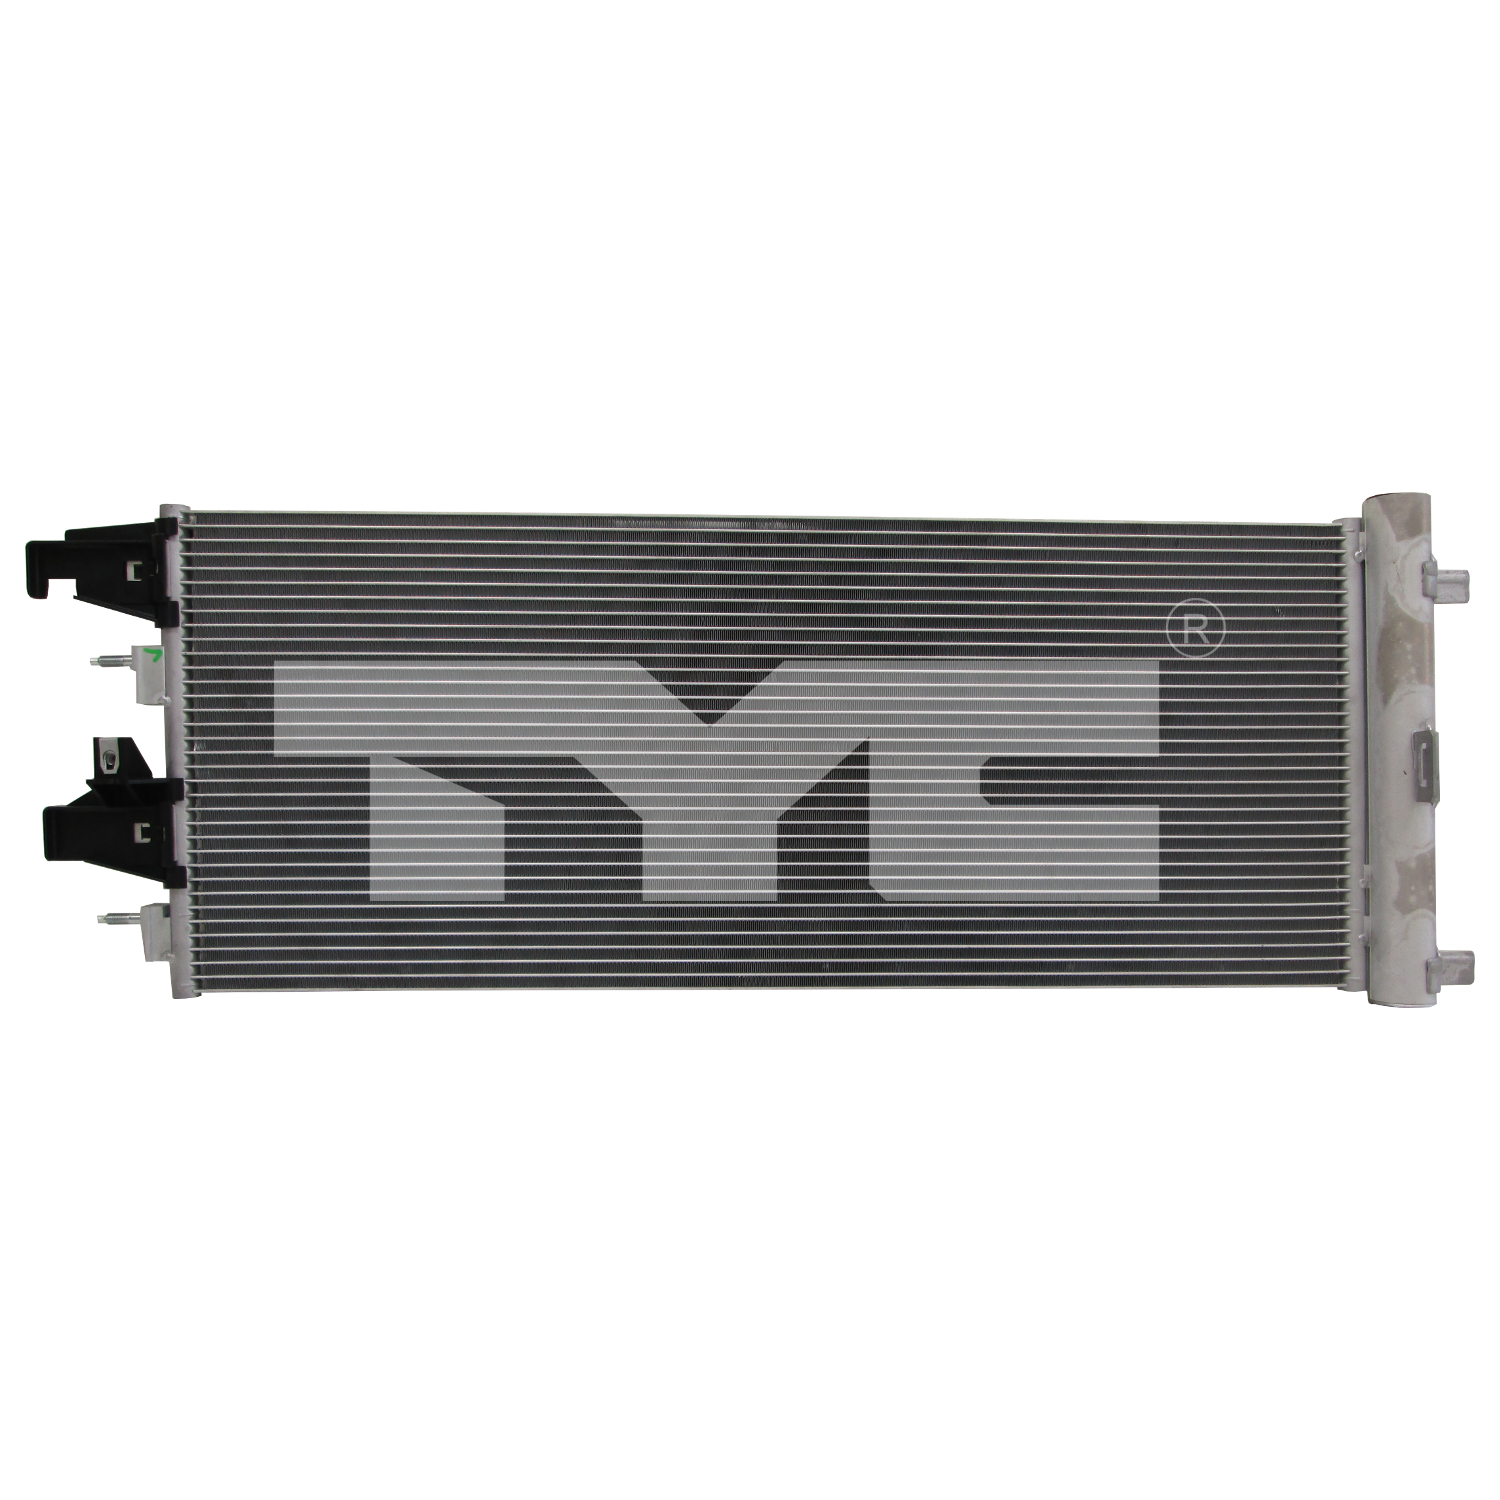 Aftermarket AC CONDENSERS for CHEVROLET - SILVERADO 1500 LTD, SILVERADO 1500 LTD,22-22,Air conditioning condenser